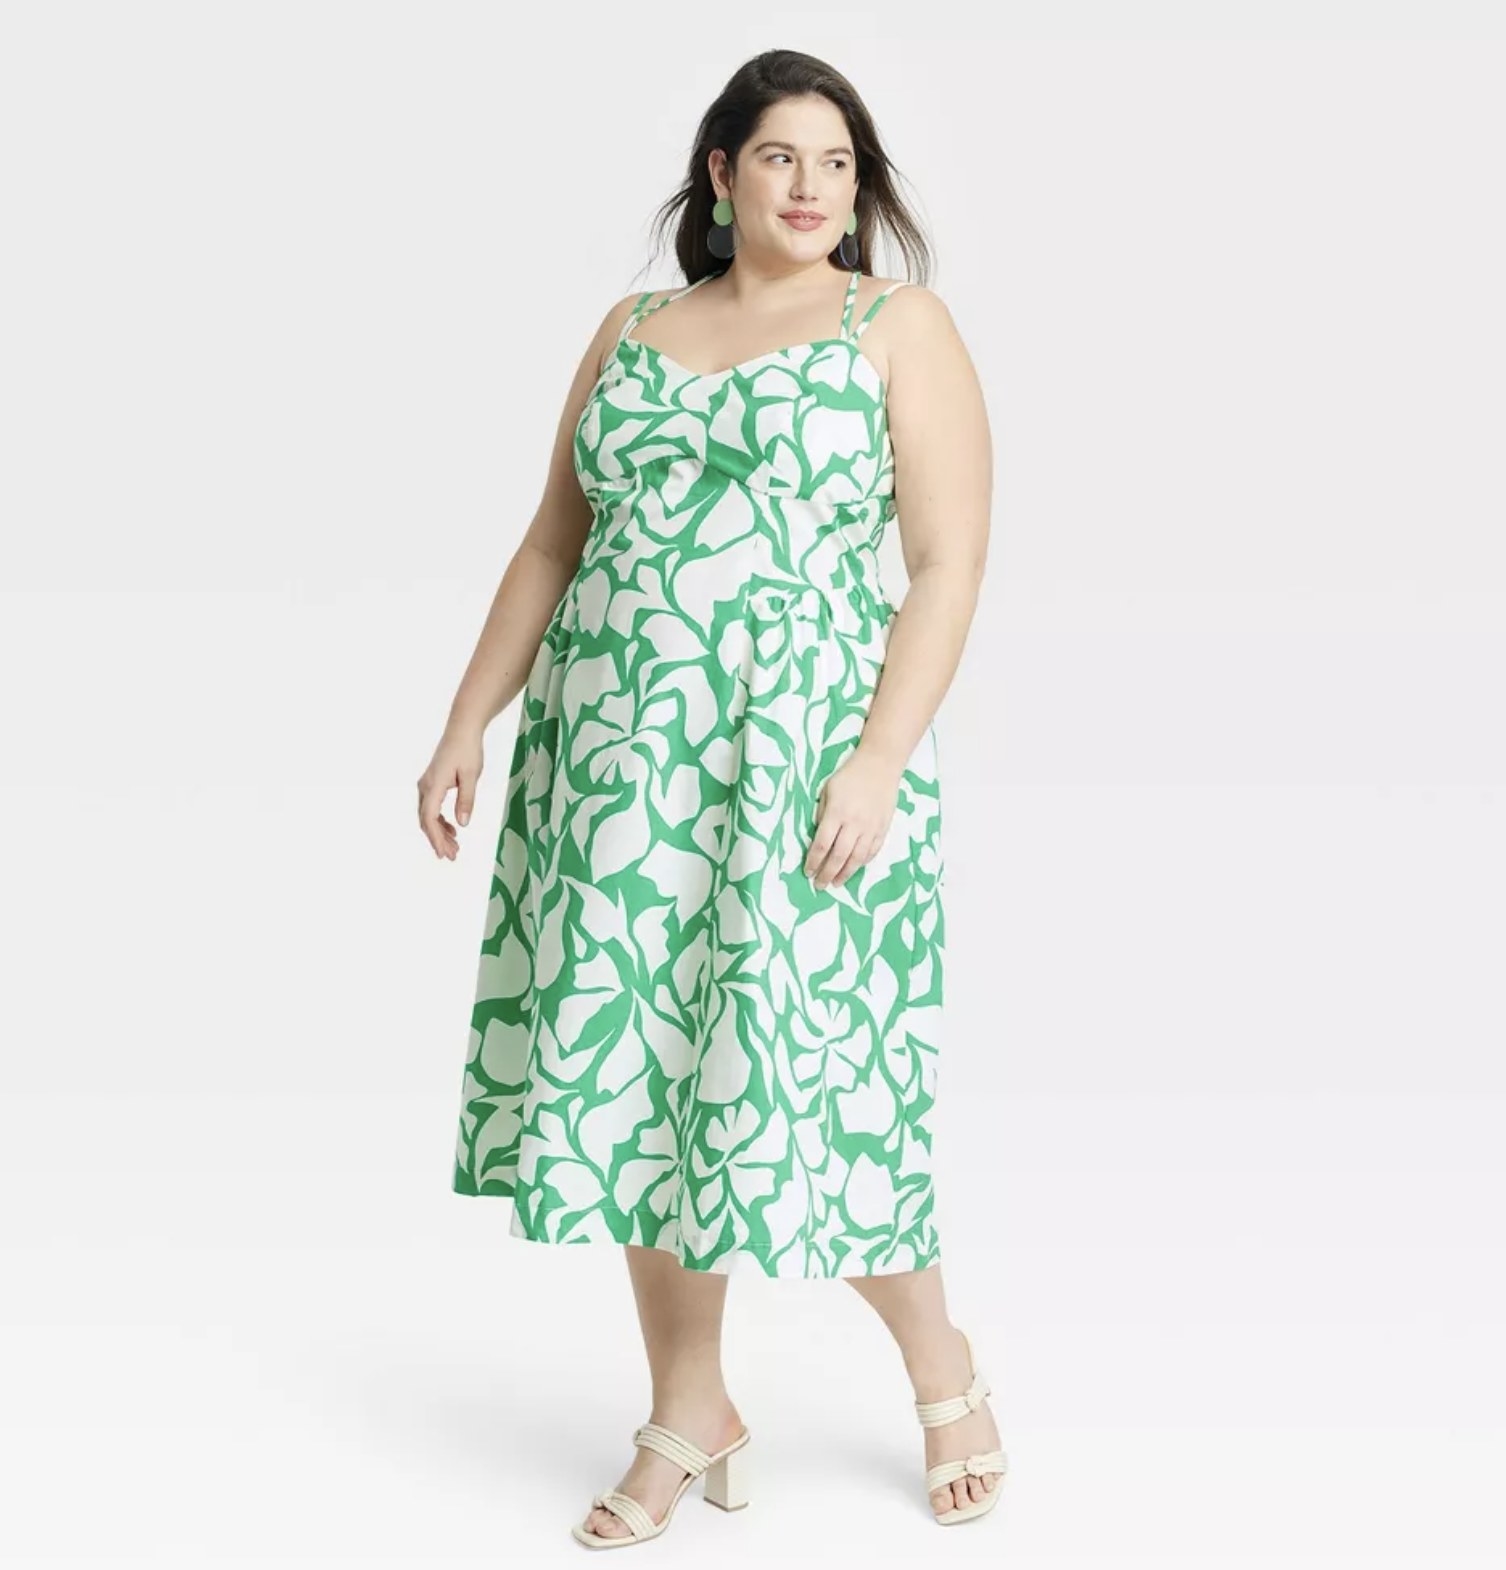 the dress in a green floral pattern